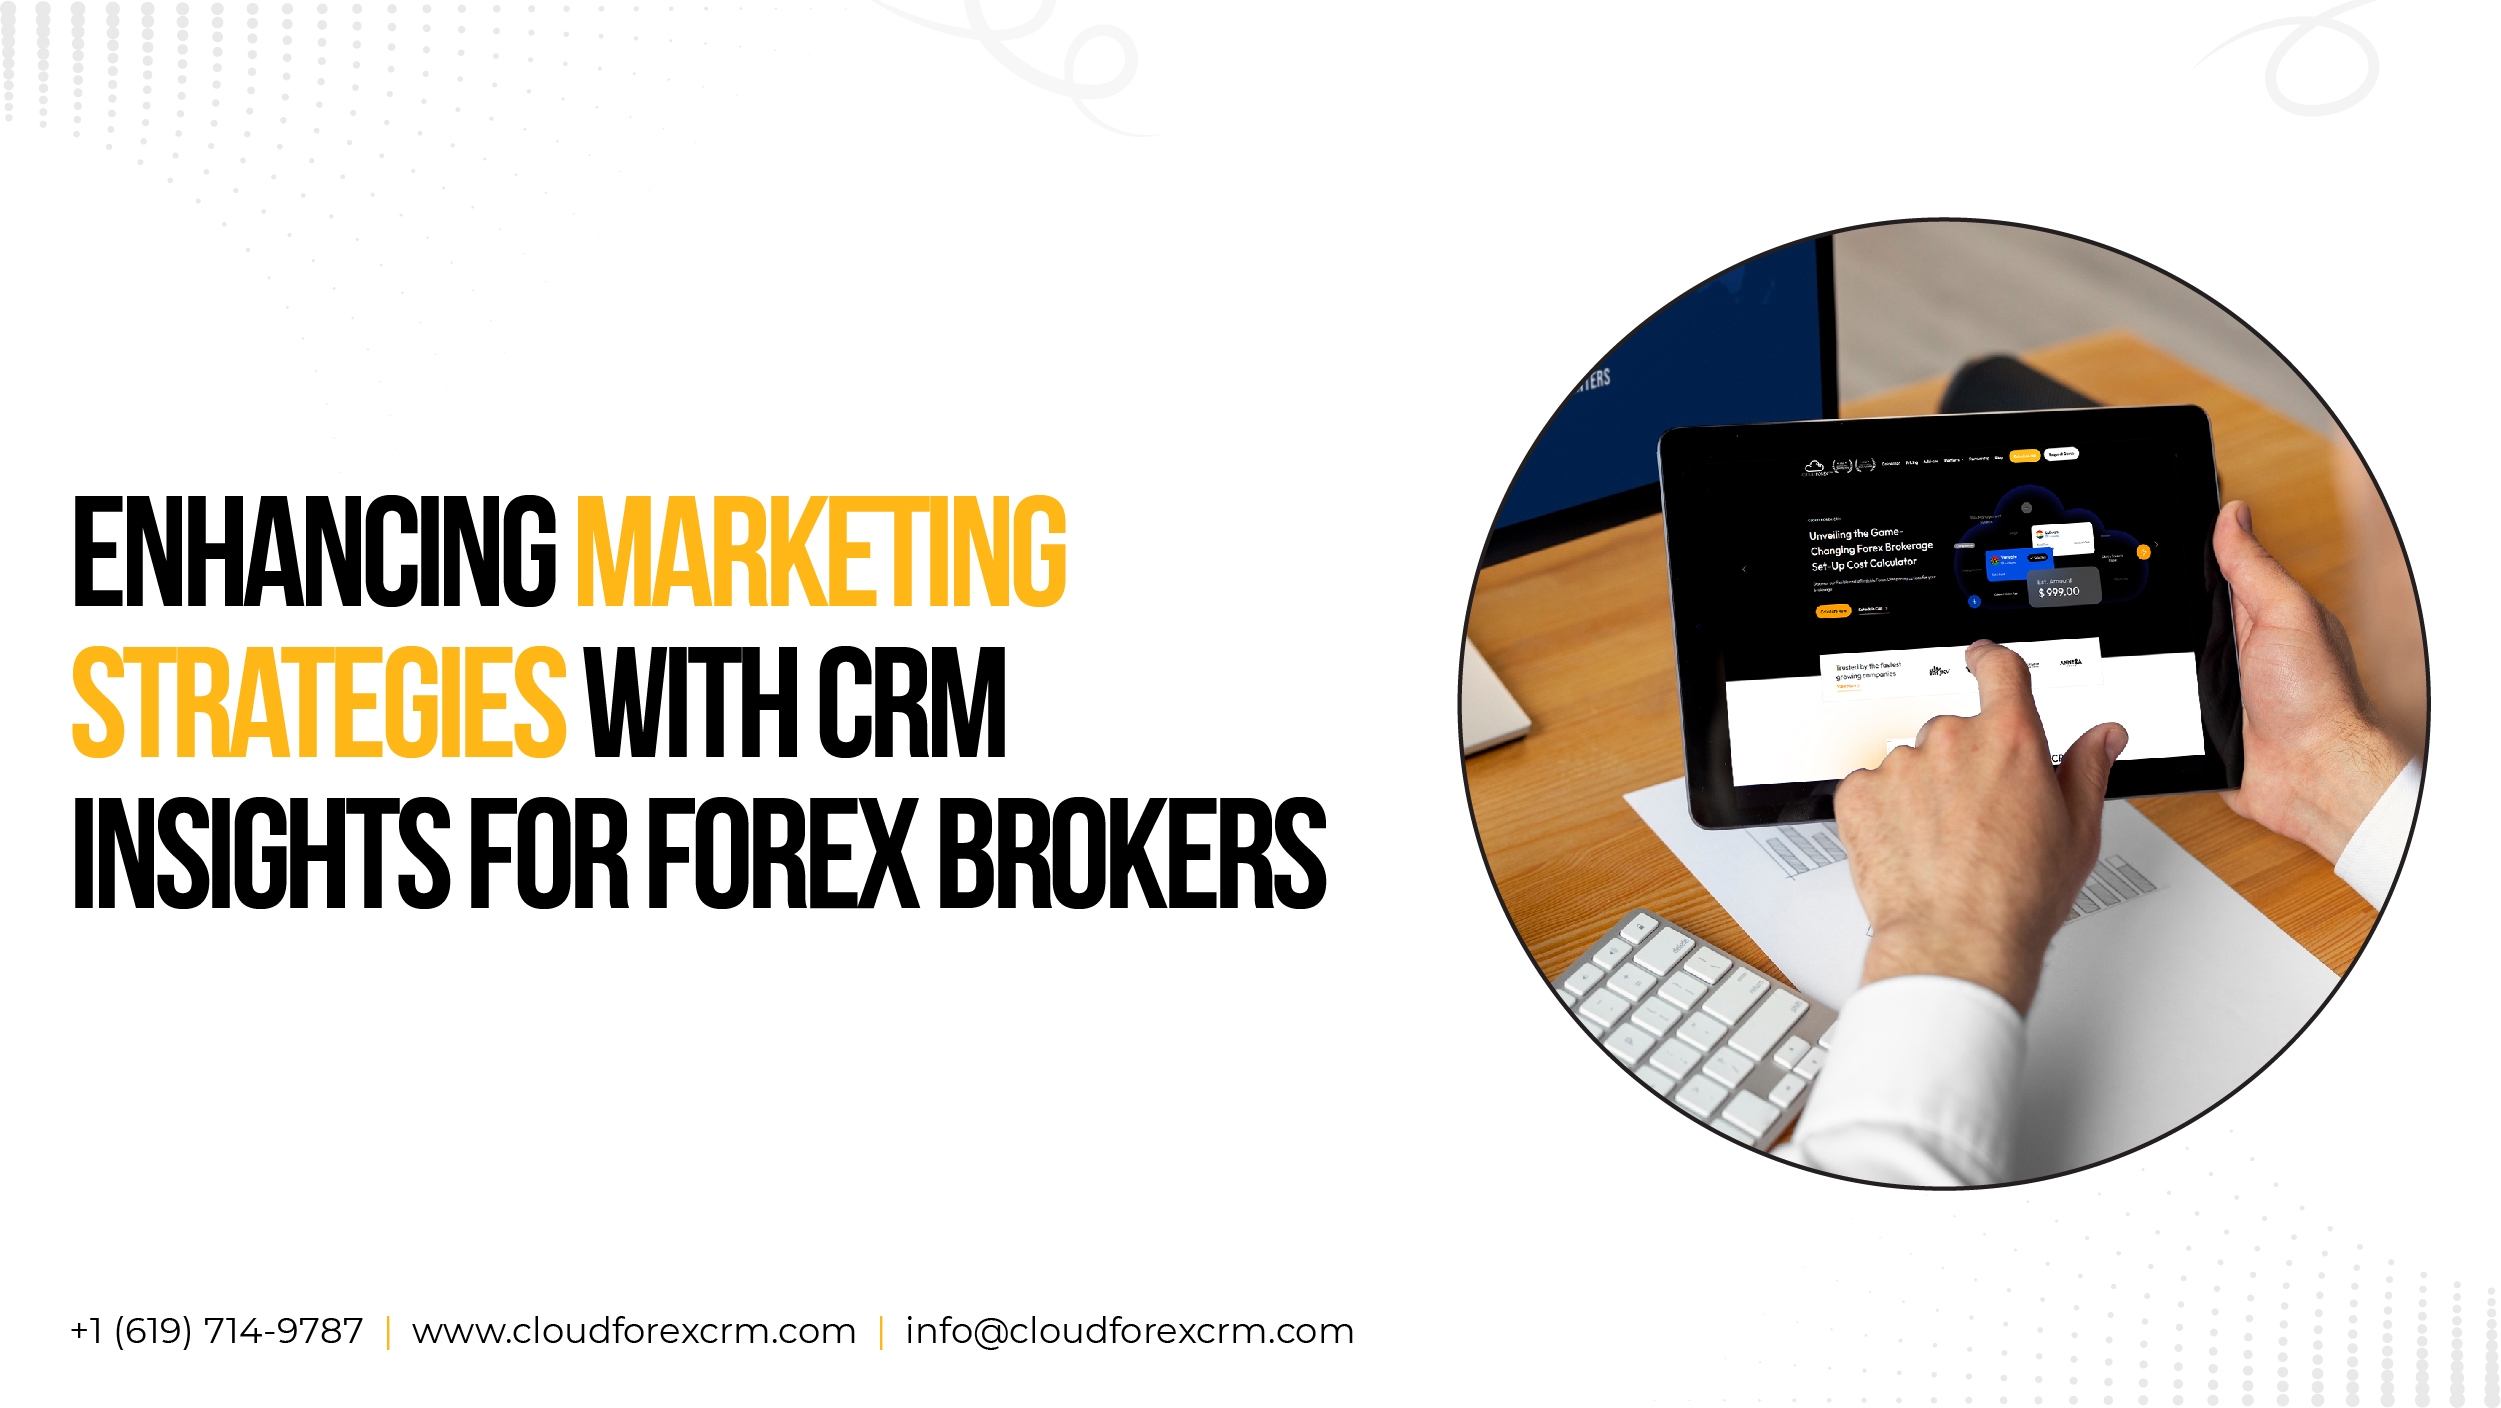 Enhancing Marketing Strategies with CRM Insights for Forex Brokers